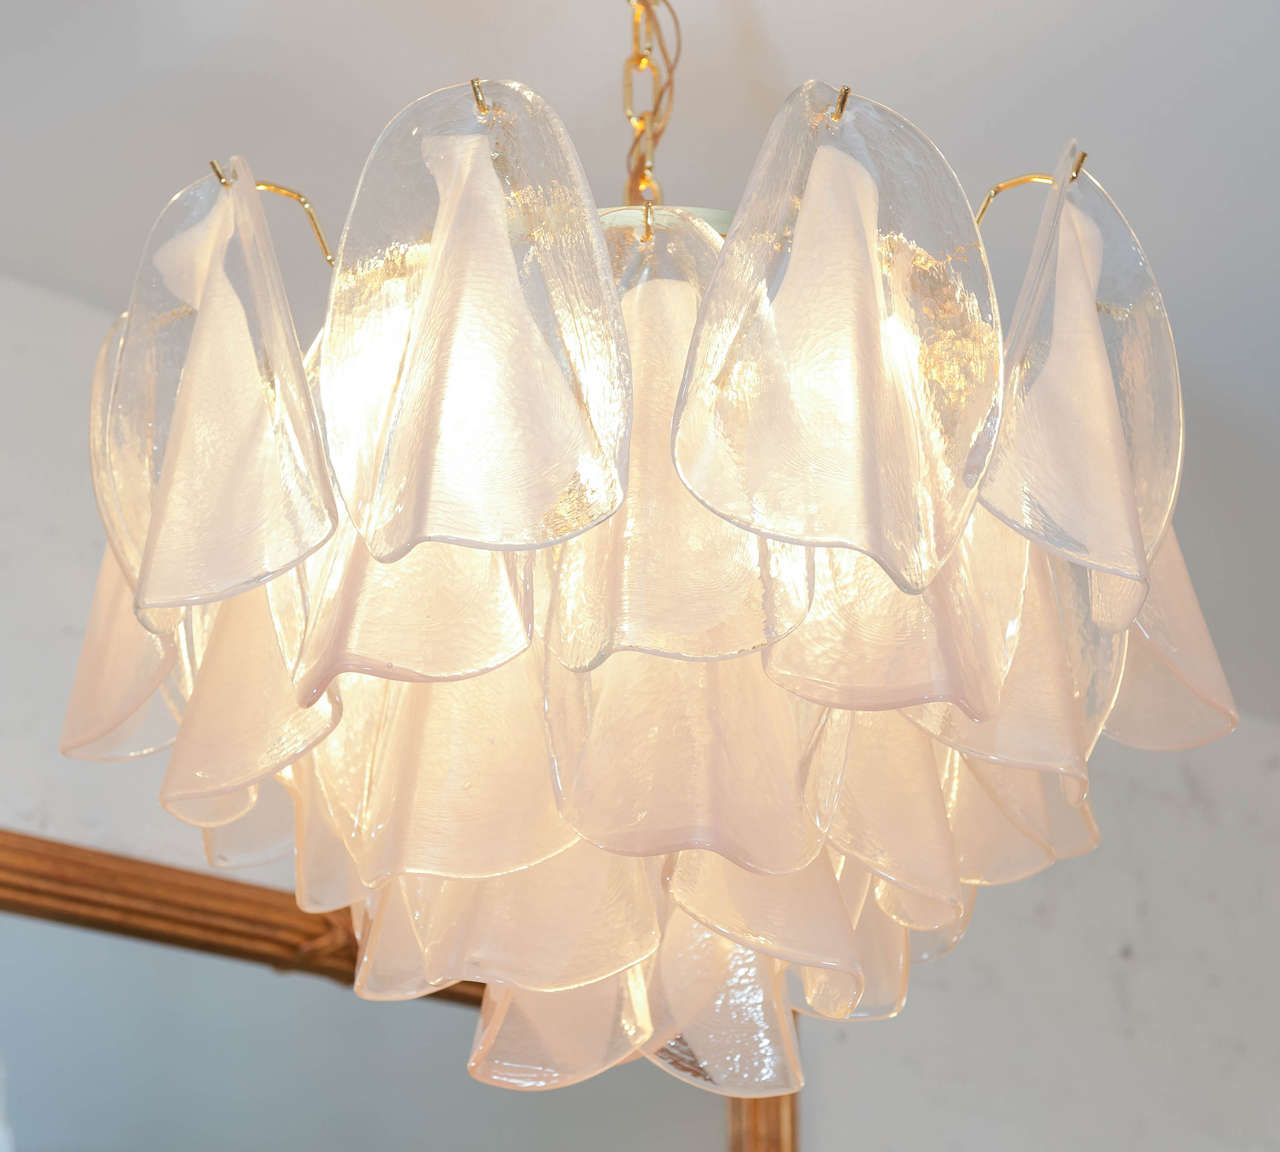 A delicate pendant light with 